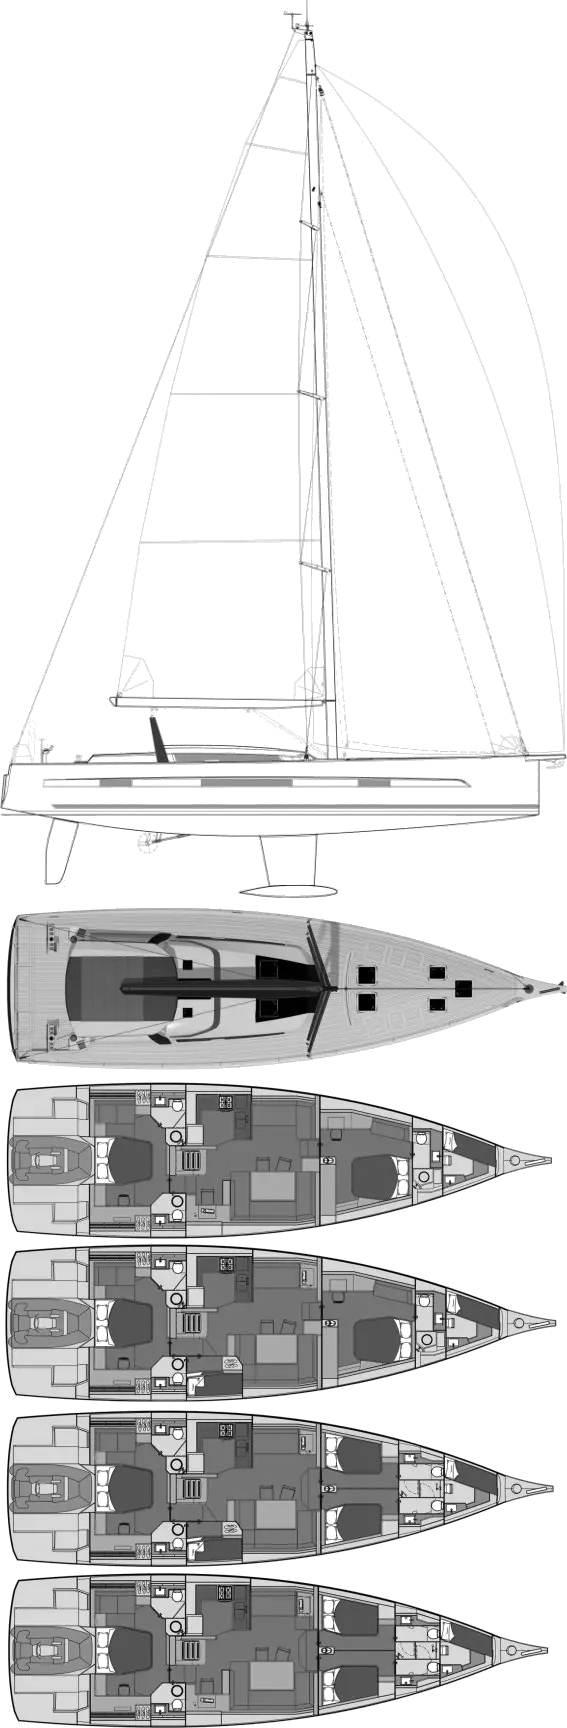 Drawing of Dufour 63